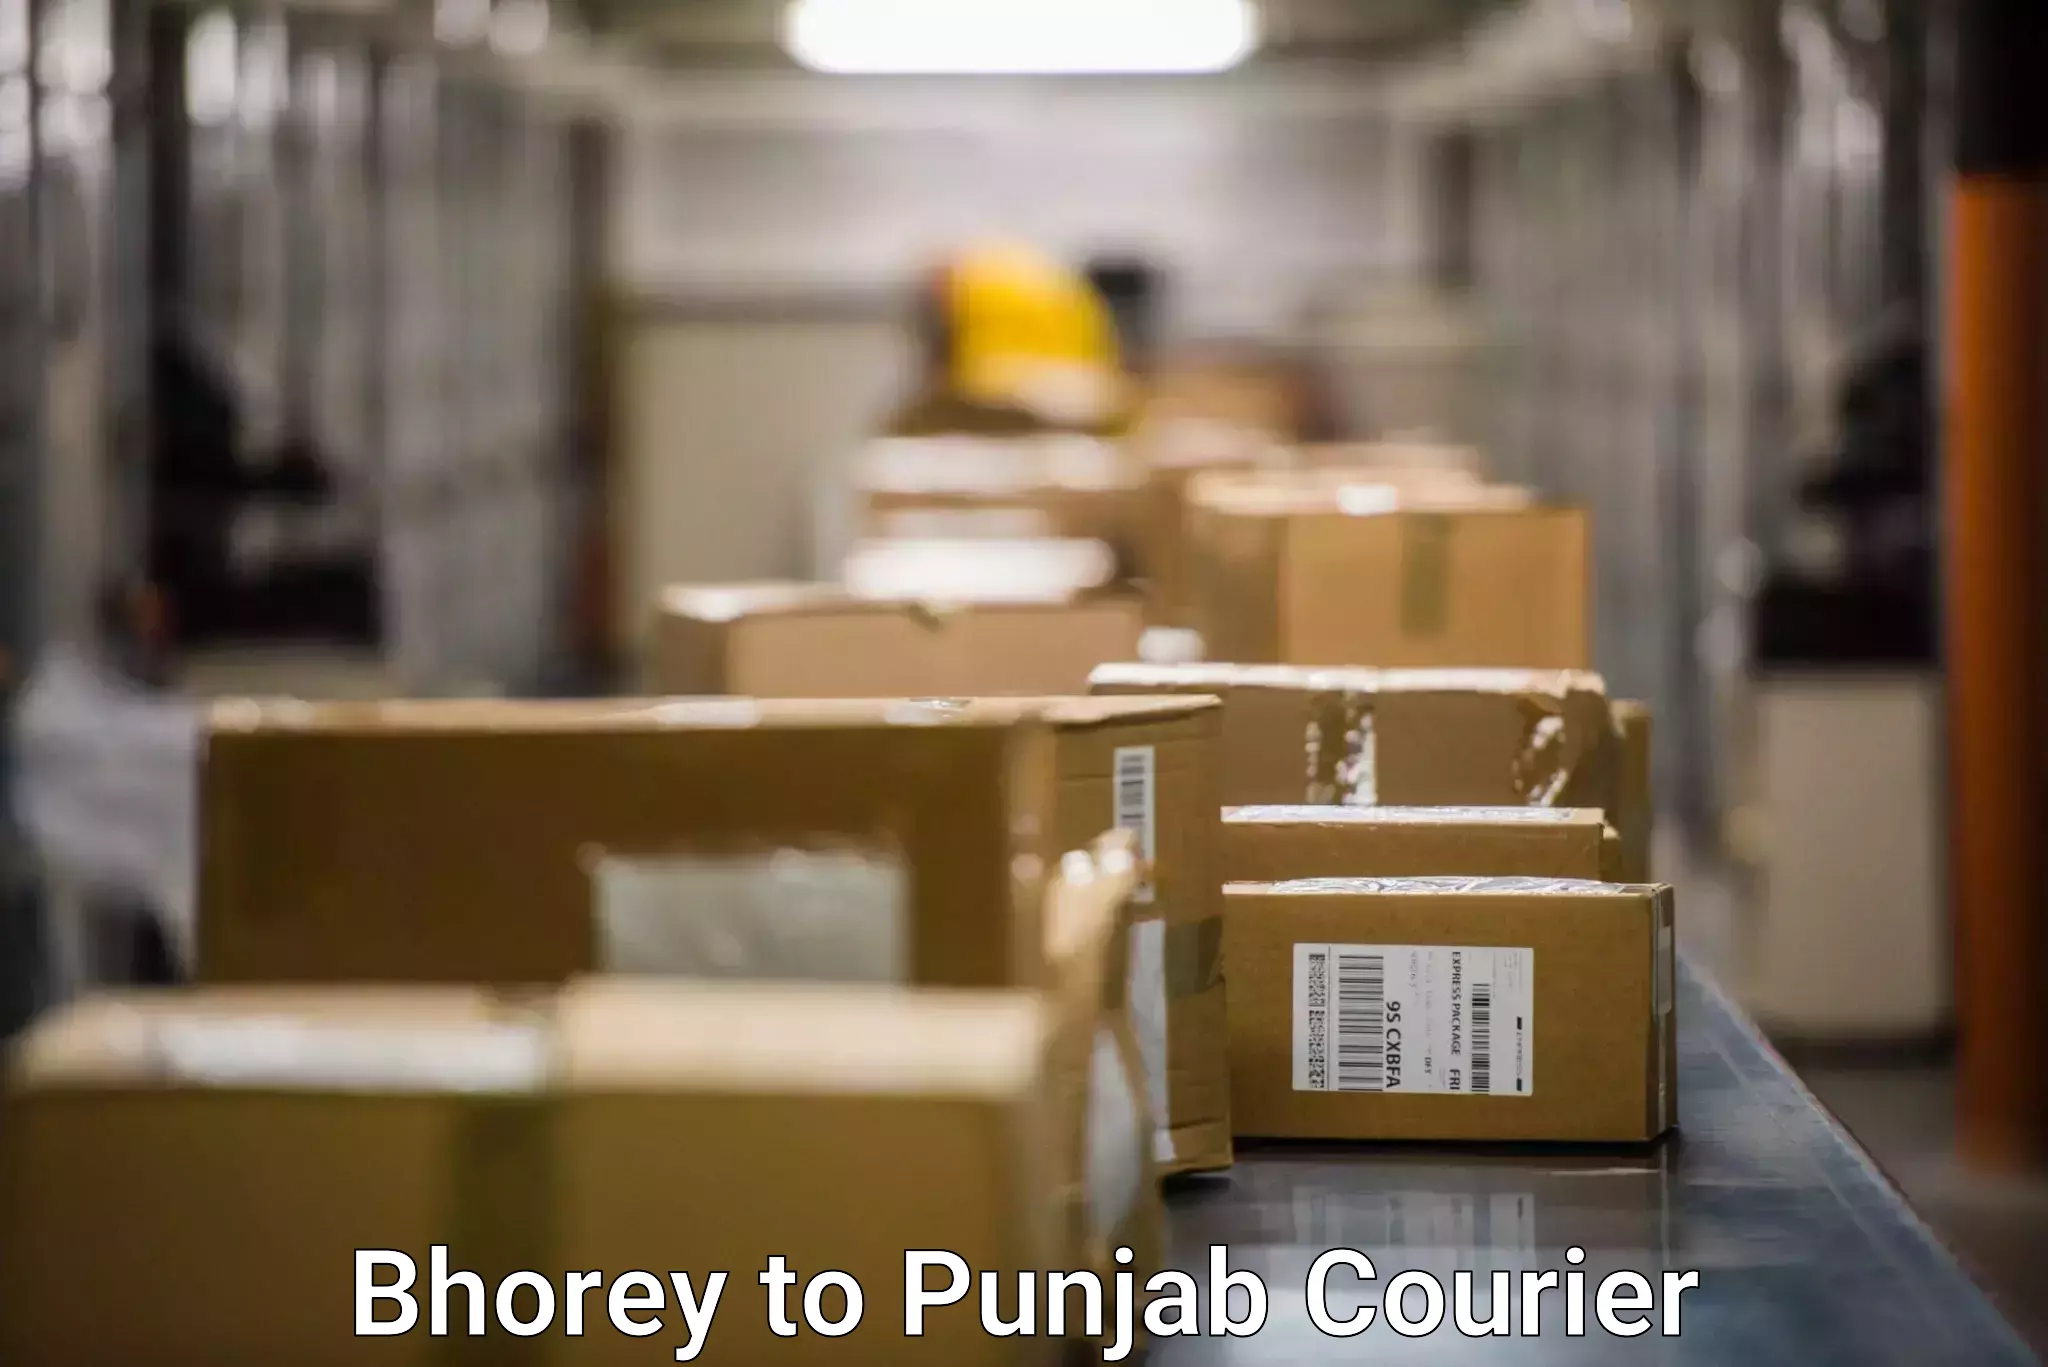 On-call courier service Bhorey to Patiala